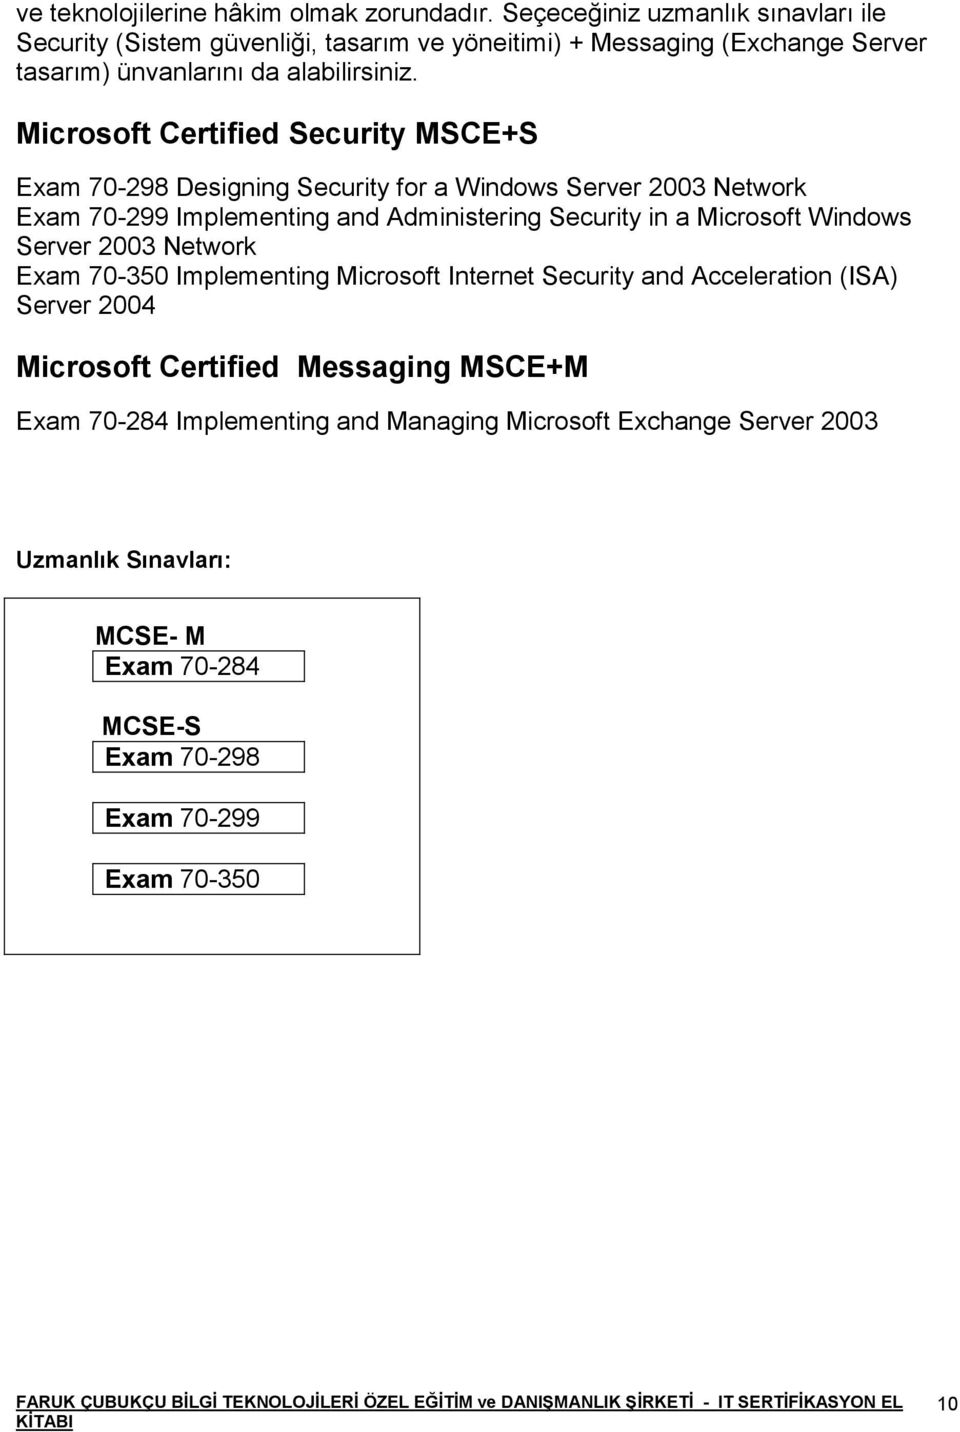 Microsoft Certified Security MSCE+S Exam 70-298 Designing Security for a Windows Server 2003 Network Exam 70-299 Implementing and Administering Security in a Microsoft